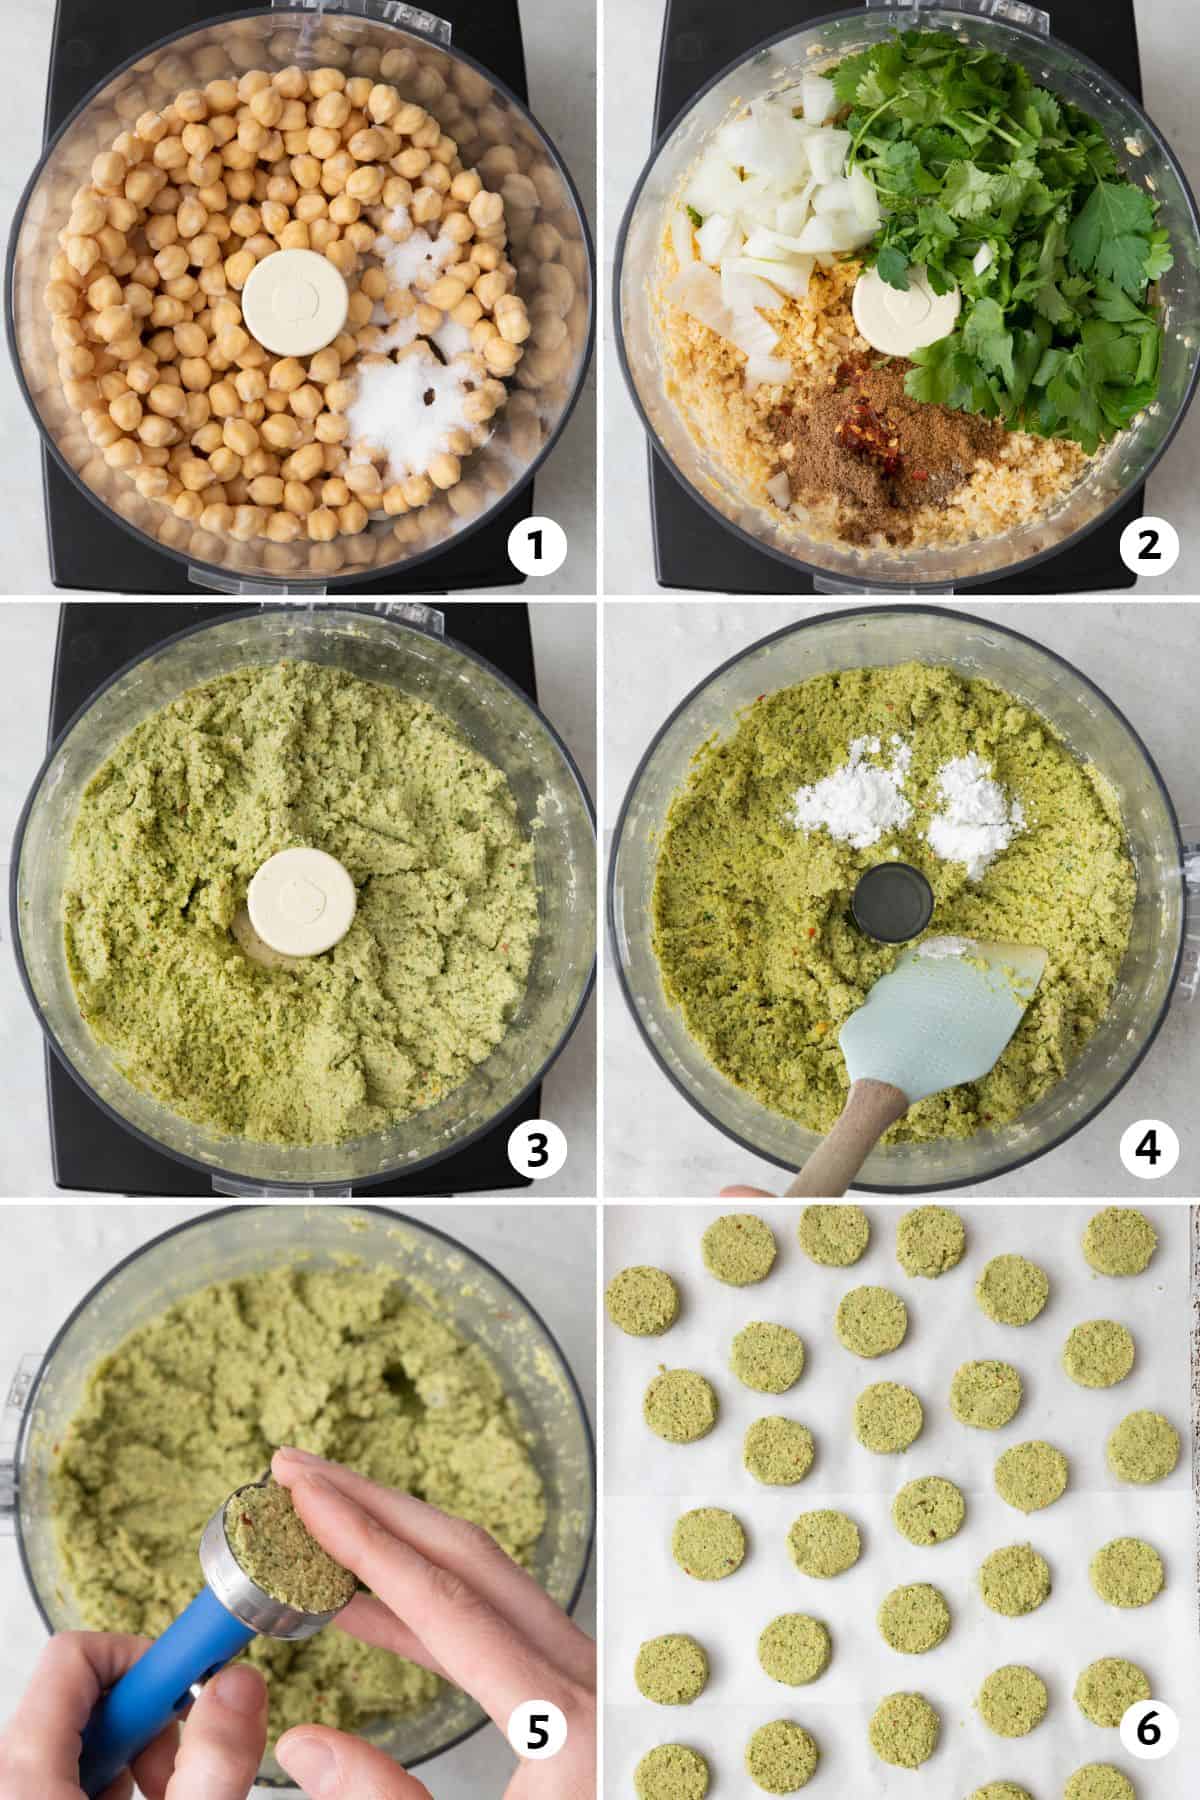 6 image collage making recipe: 1- chickepeas in a food processor with salt, 2- after pulsed with cilantro, parsley, onion and spiced added, 3- final falafel mixture after blending, 4- baking powder sprinkled on top. 5- pressing mixture into a falafel scoop, falafel flats on parchment paper.